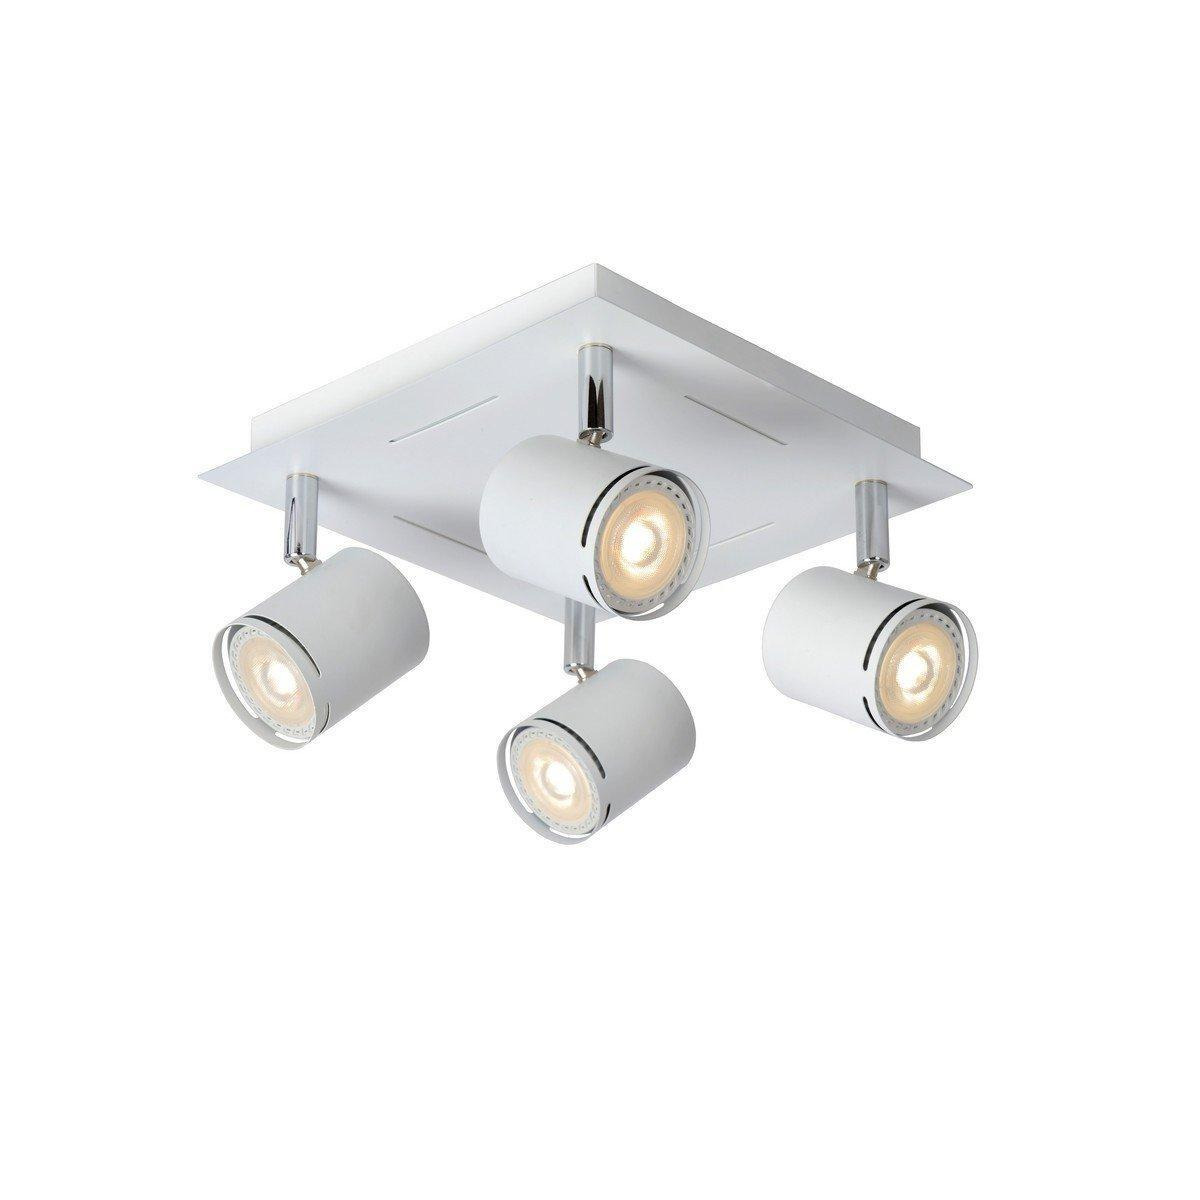 'RILOU' Dimmable Rotatable Stylish Indoor LED Ceiling Spotlight GU10 - image 1